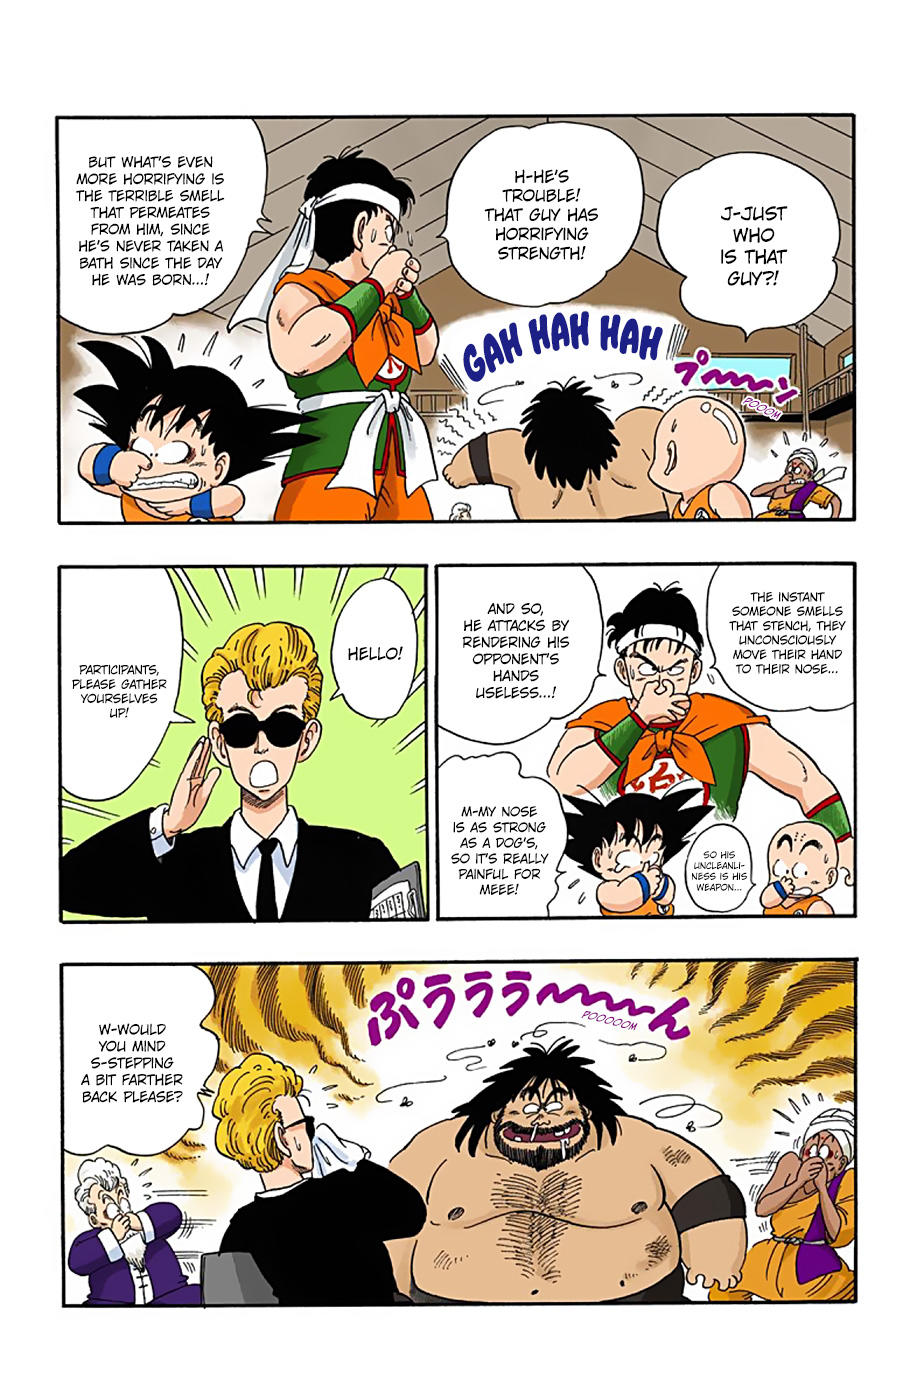 Dragon Ball - Full Color Edition Vol.3 Chapter 35: The Match-Ups Decided!! page 8 - Mangakakalot